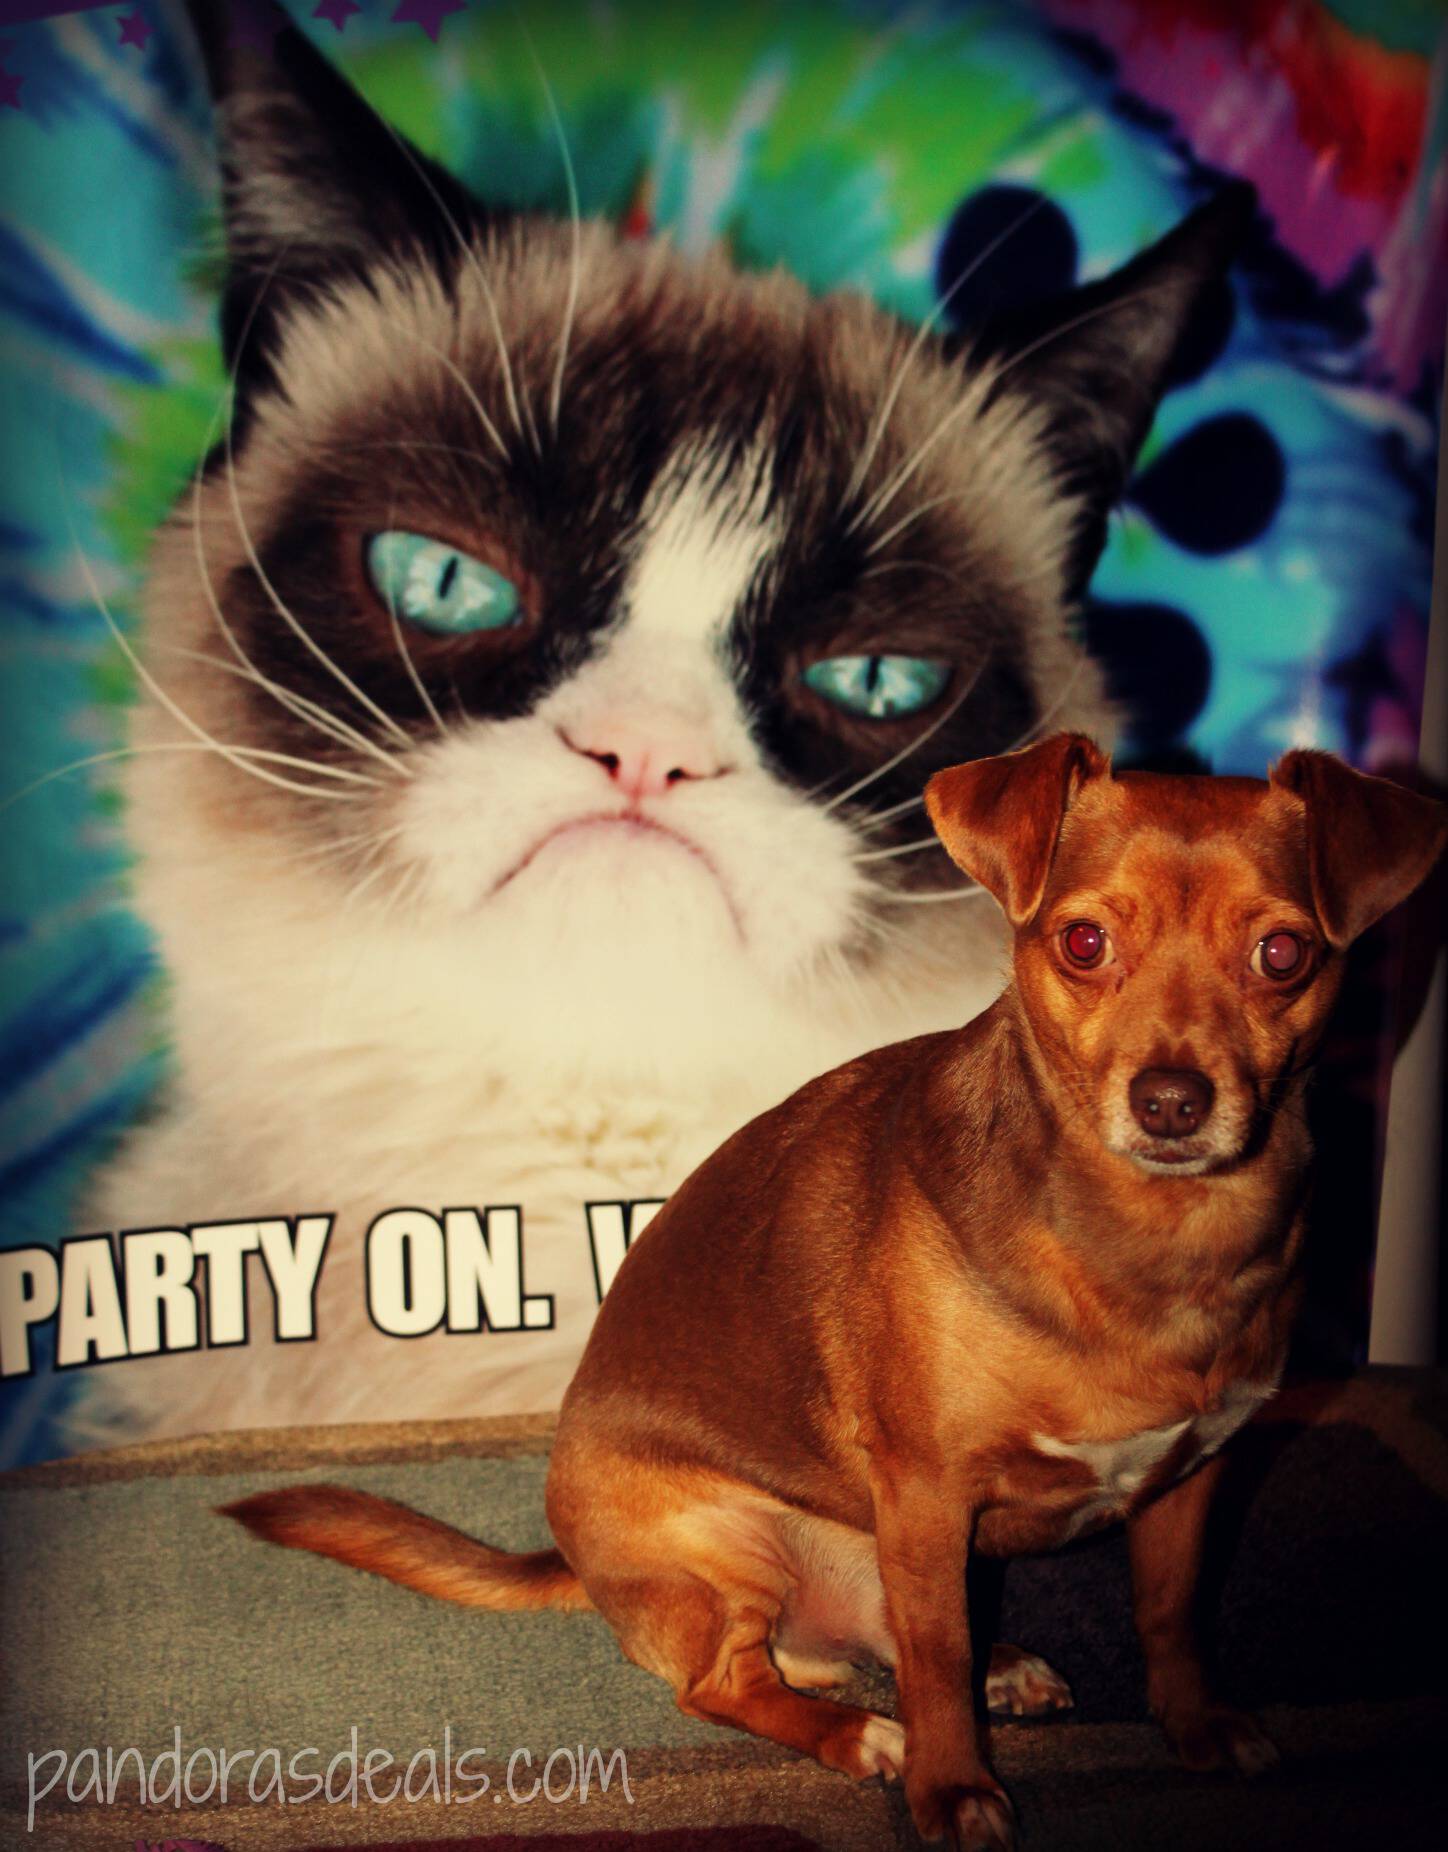 Party With Grumpy Cat And You Could Go to NYC!